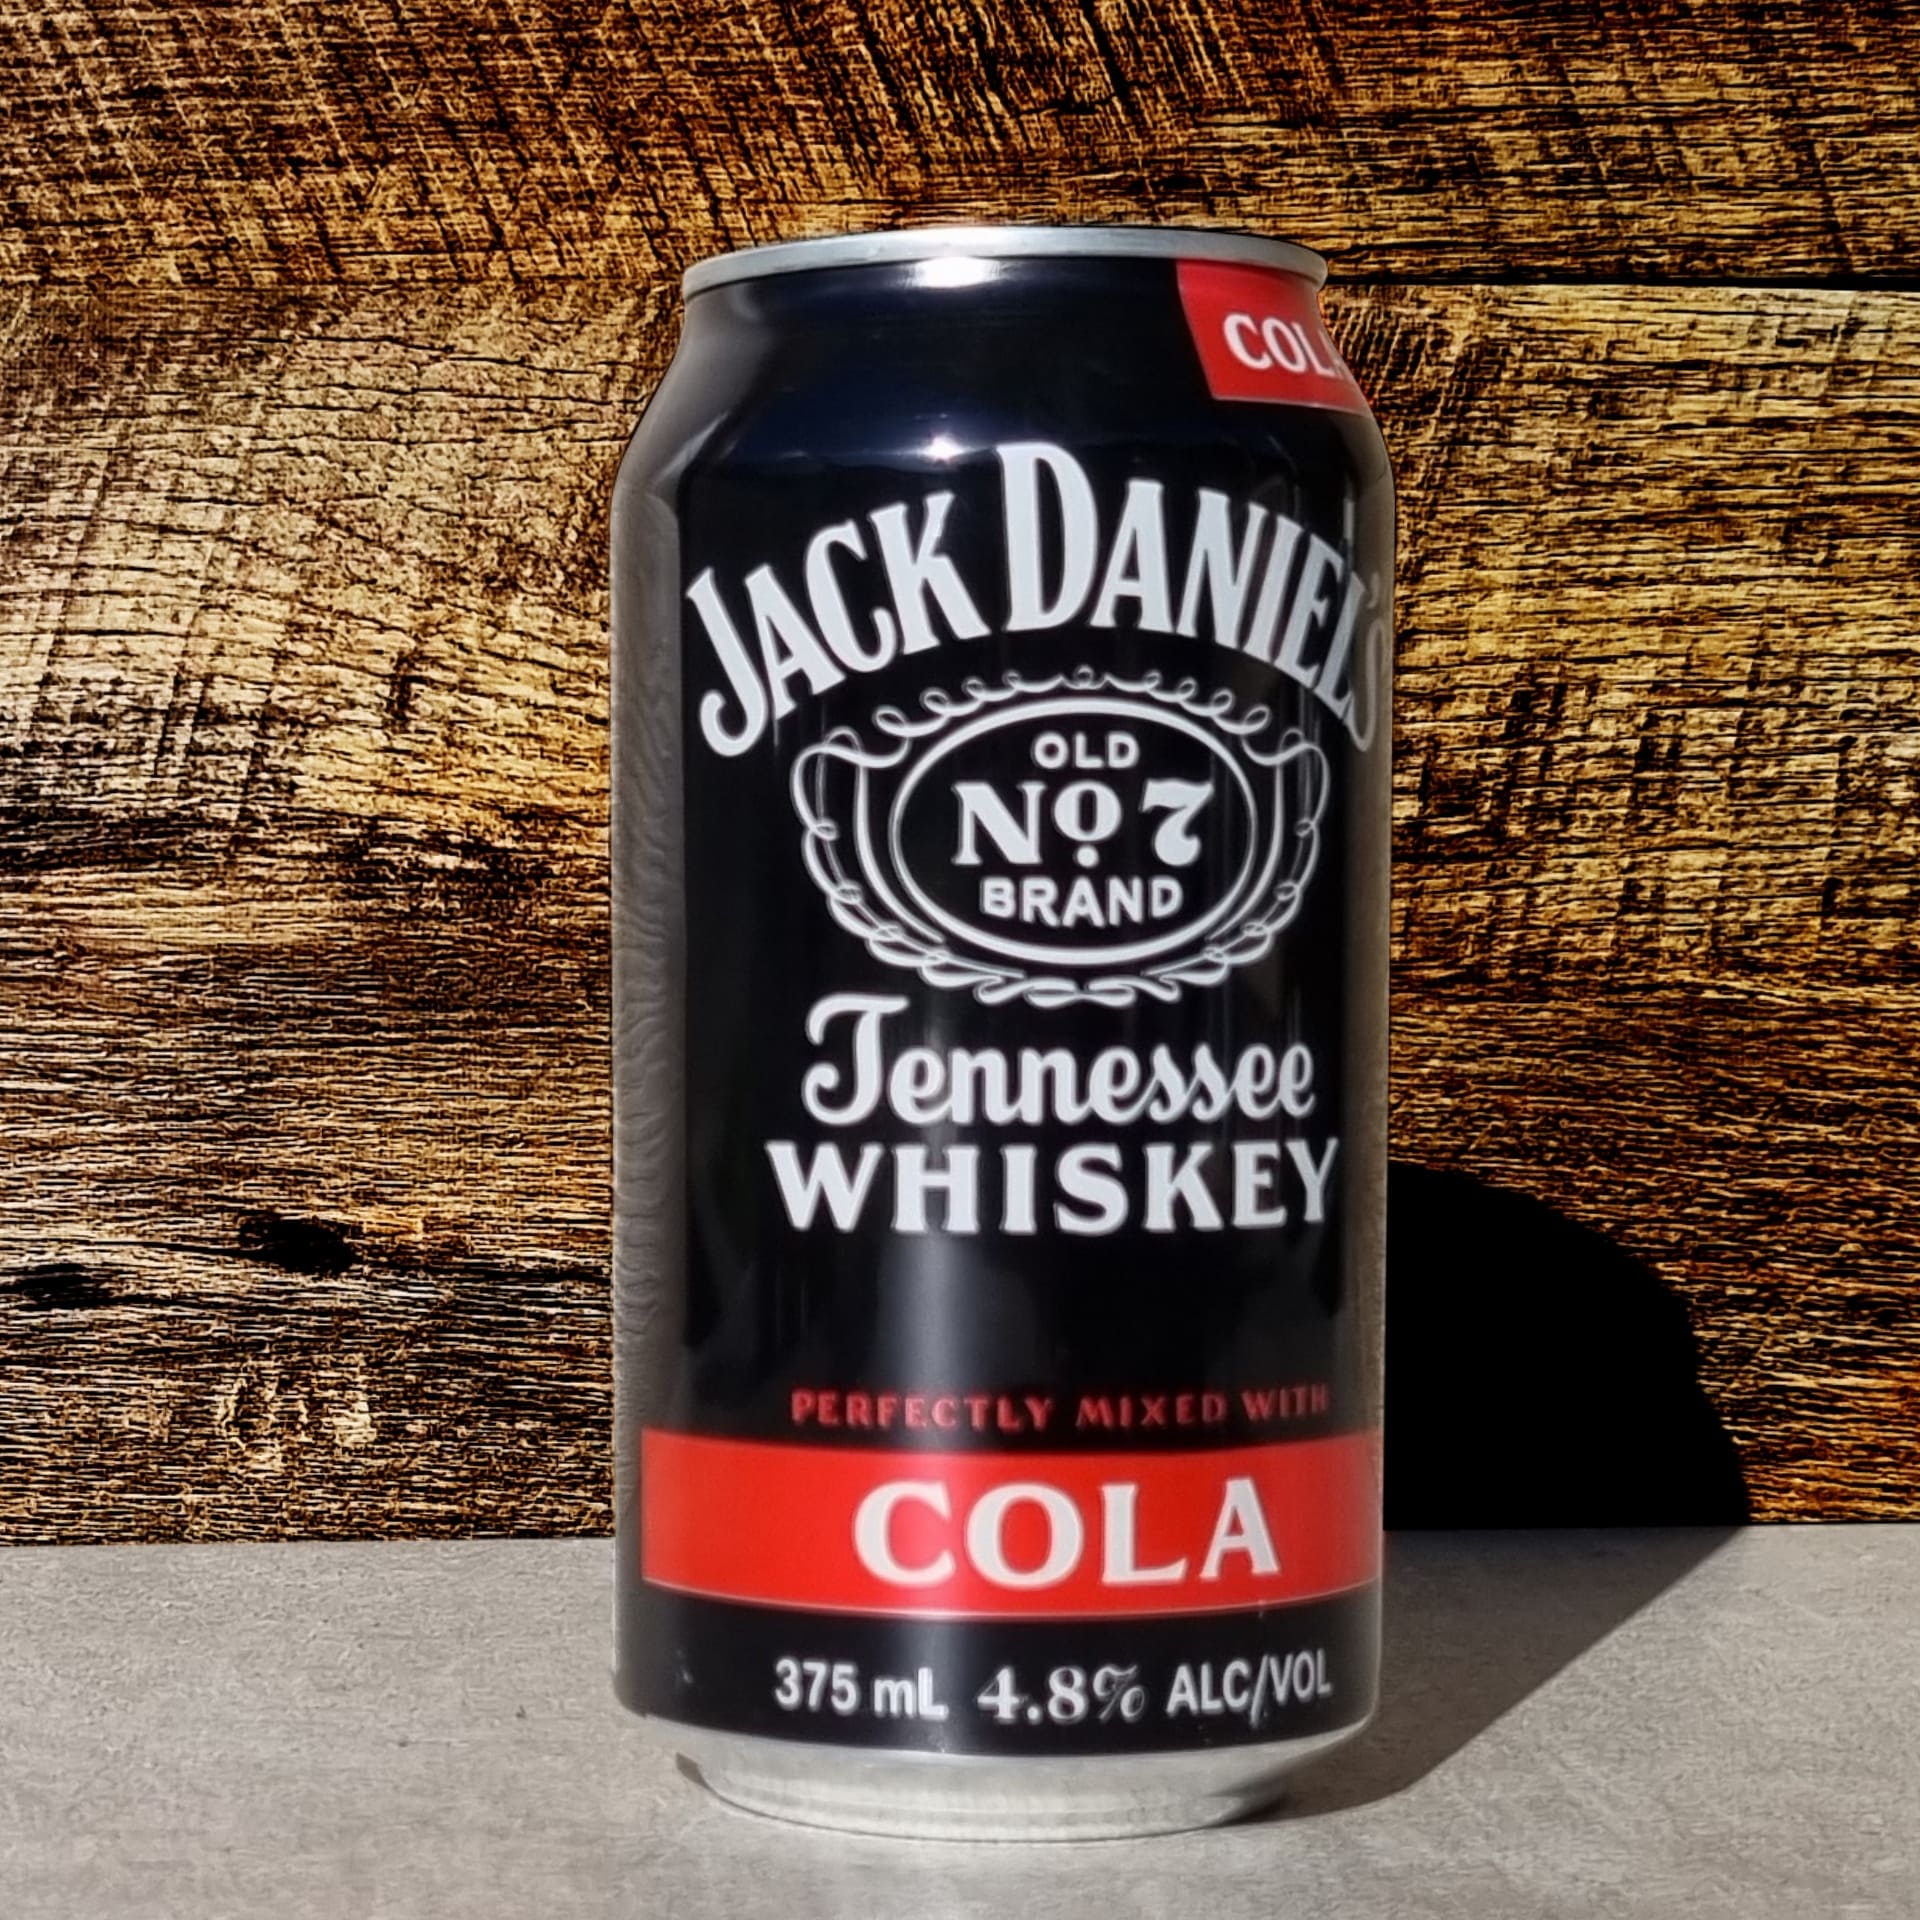 Jack Daniels and cola can